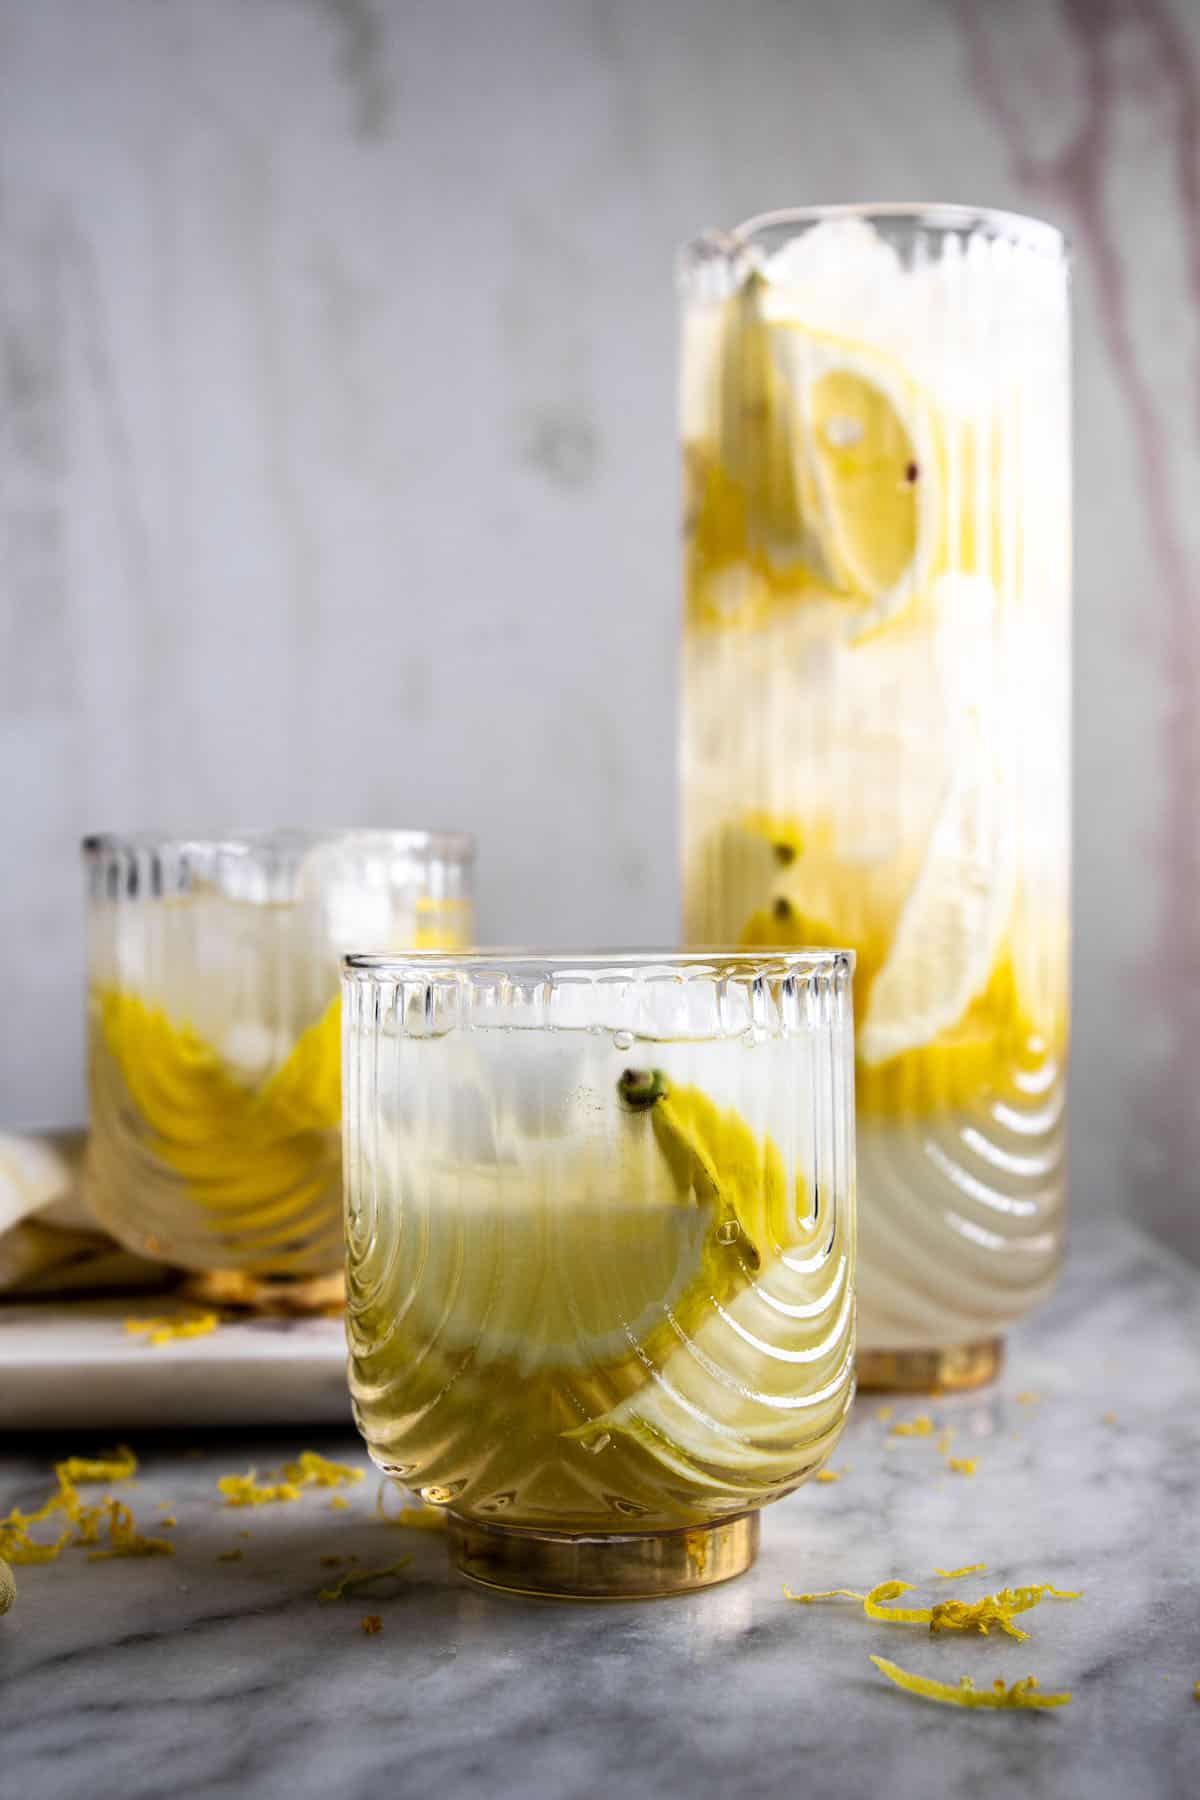 A Simple Recipe For Lemonade With California Lemons And What To Make With It.